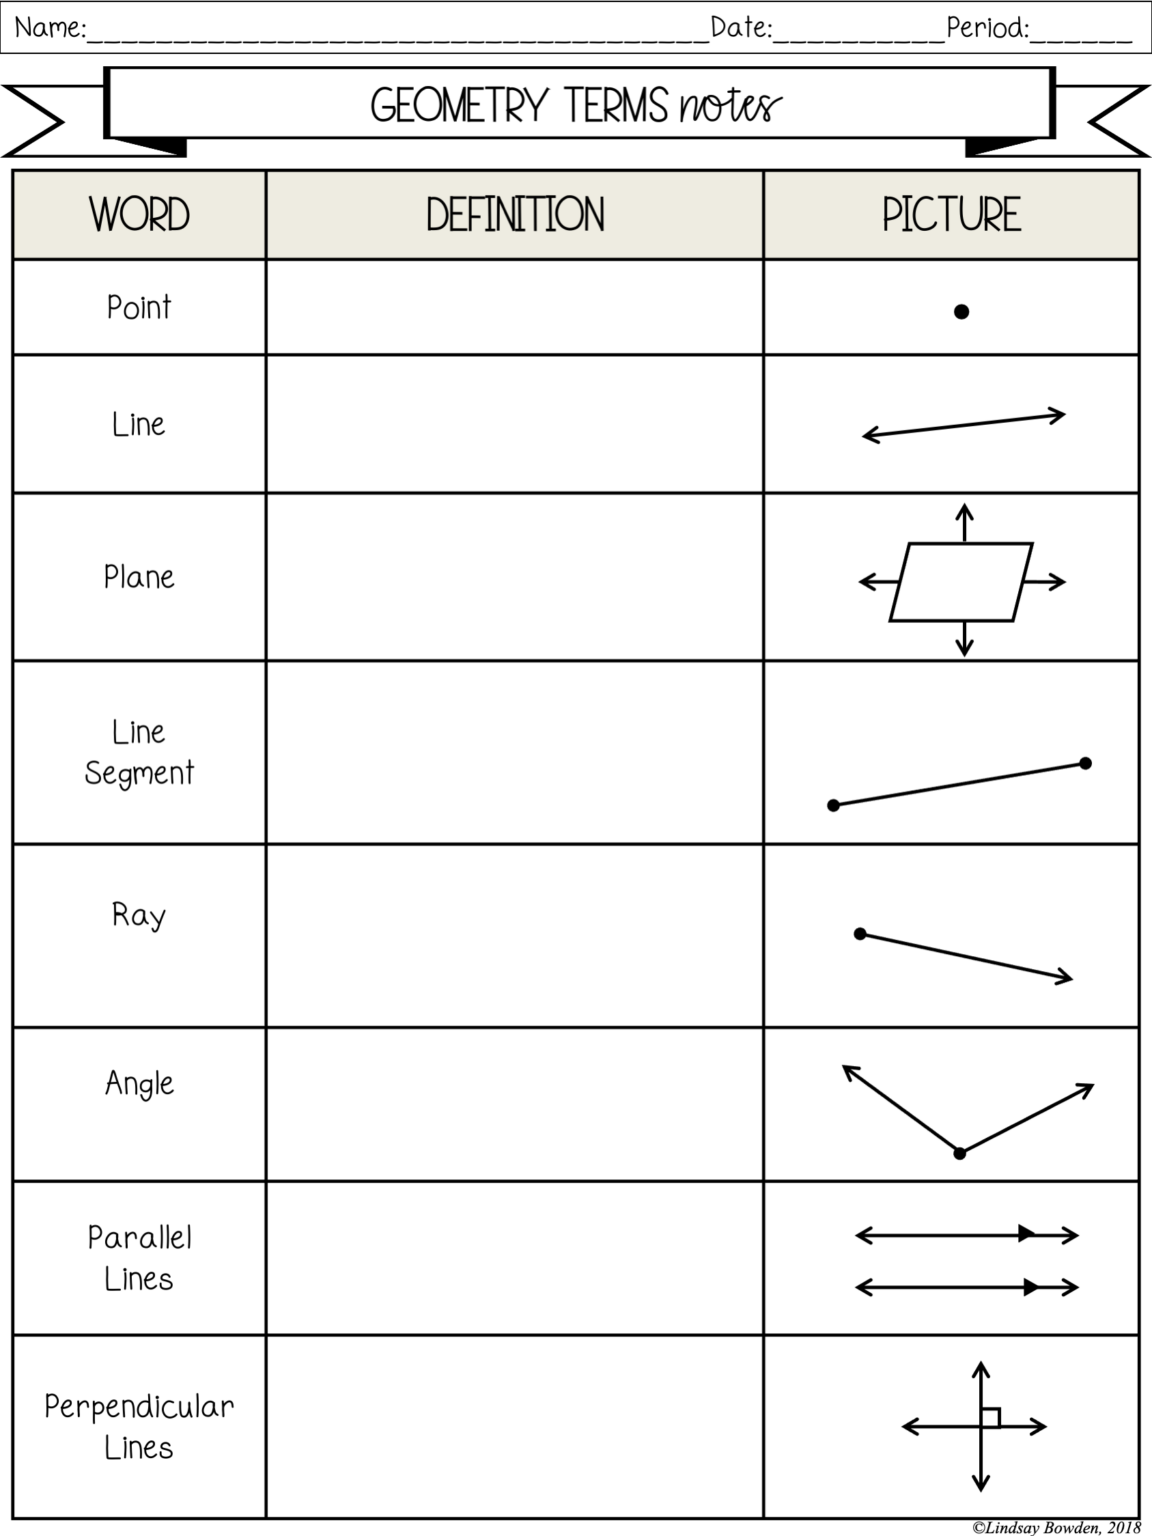 geometry-terms-notes-and-worksheets-lindsay-bowden